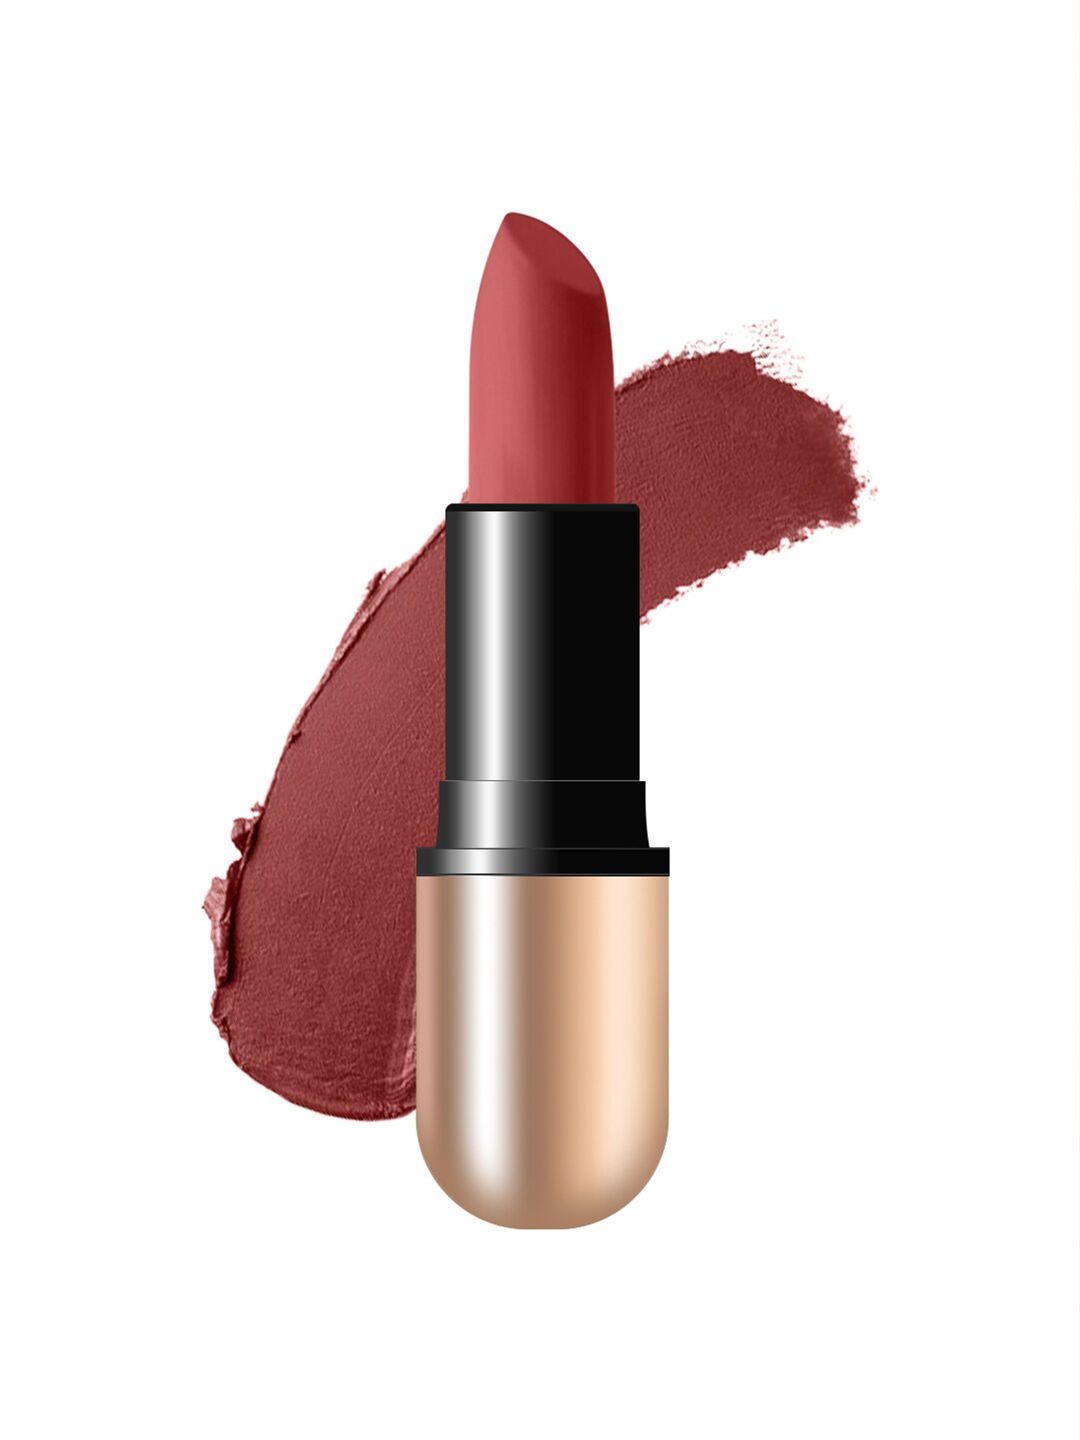 Sivanna Colors Matte Stay Lipstick Kiss Me - HF688 08 Price in India